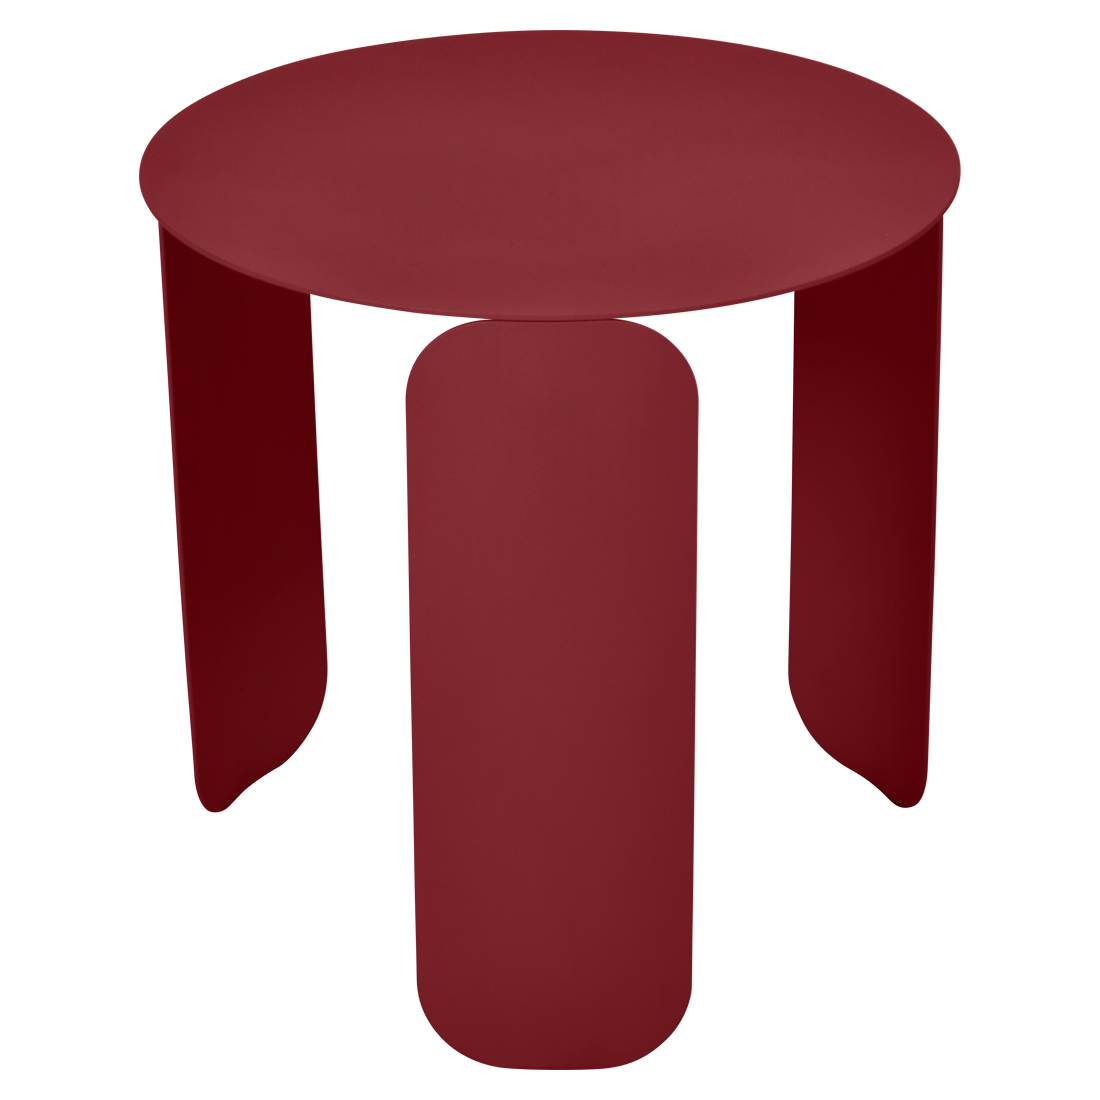 table basse design, table basse metal, table basse fermob, table basse rouge